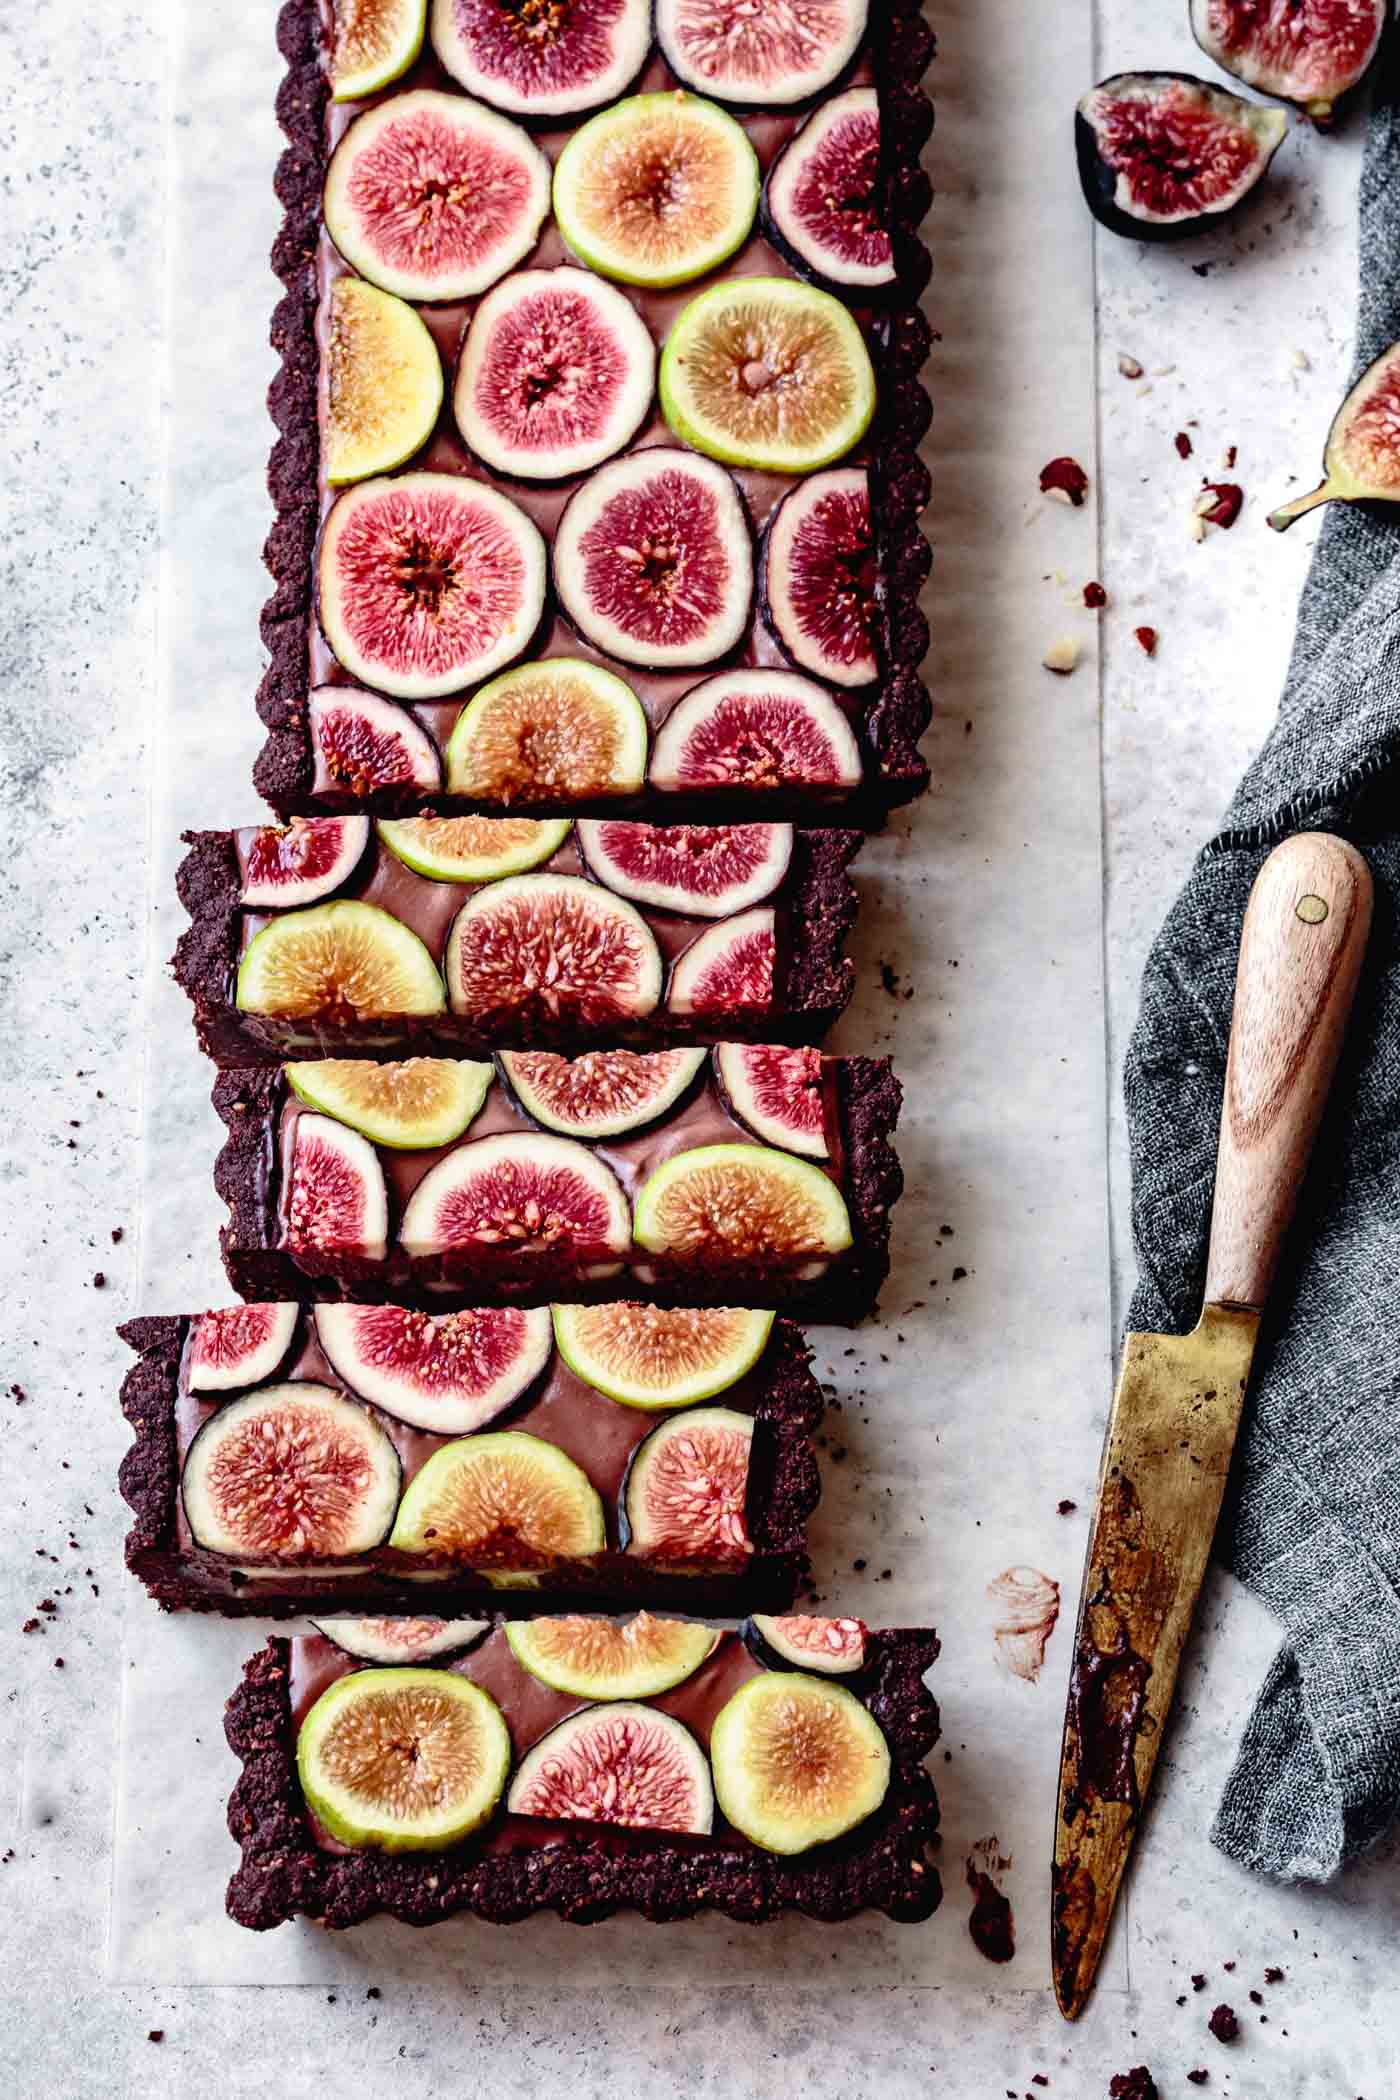 Chocolate fig tart, partially sliced